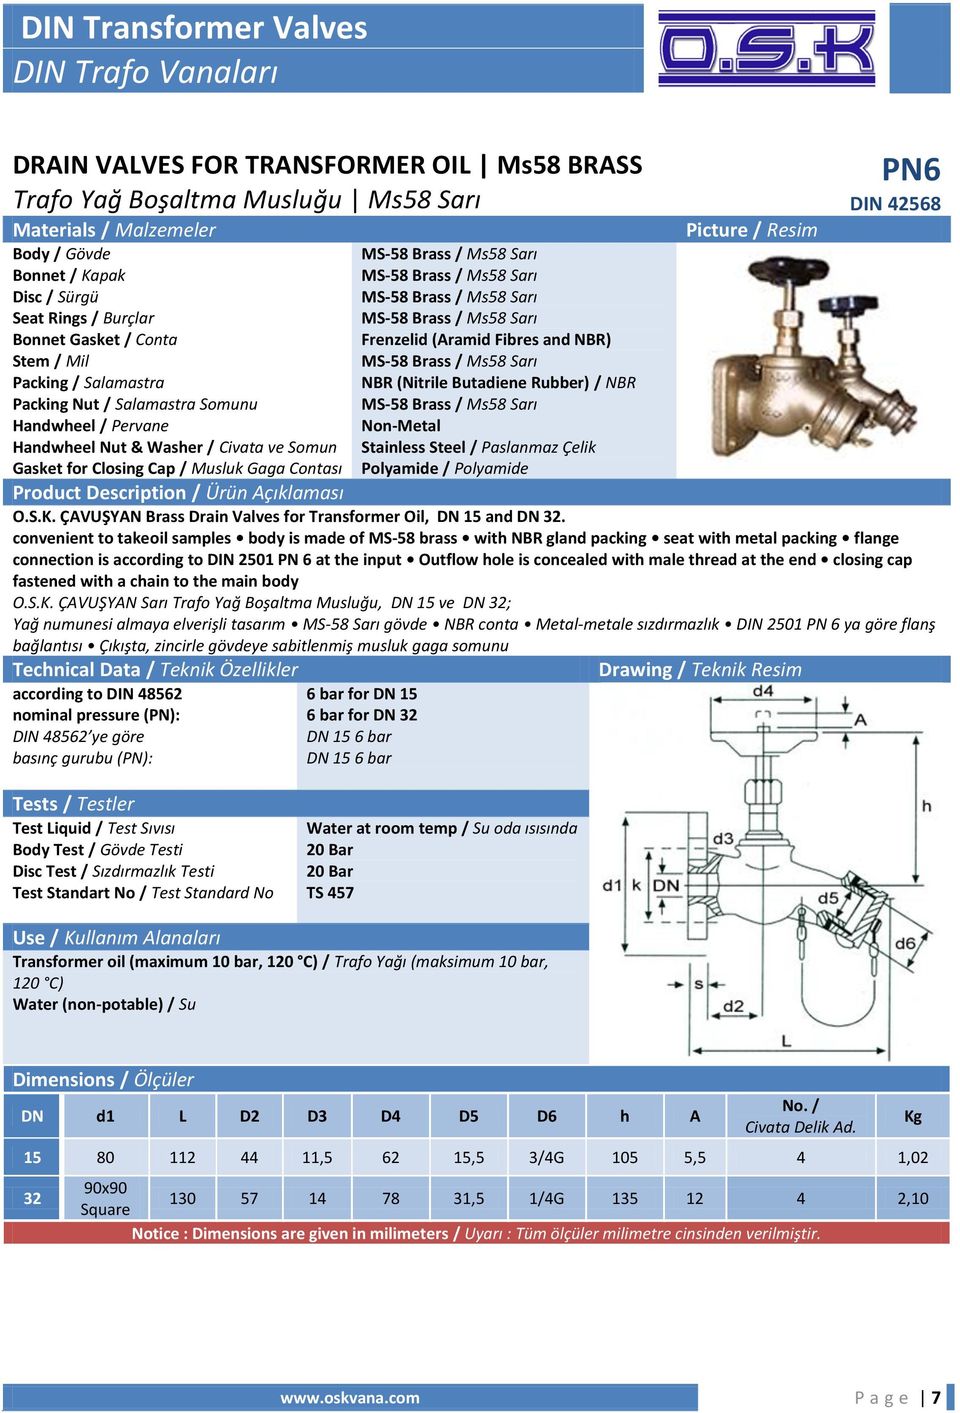 convenient to takeoil samples body is made of MS-5 brass with NBR gland packing seat with metal packing flange connection is according to DIN 2501 PN 6 at the input Outflow hole is concealed with